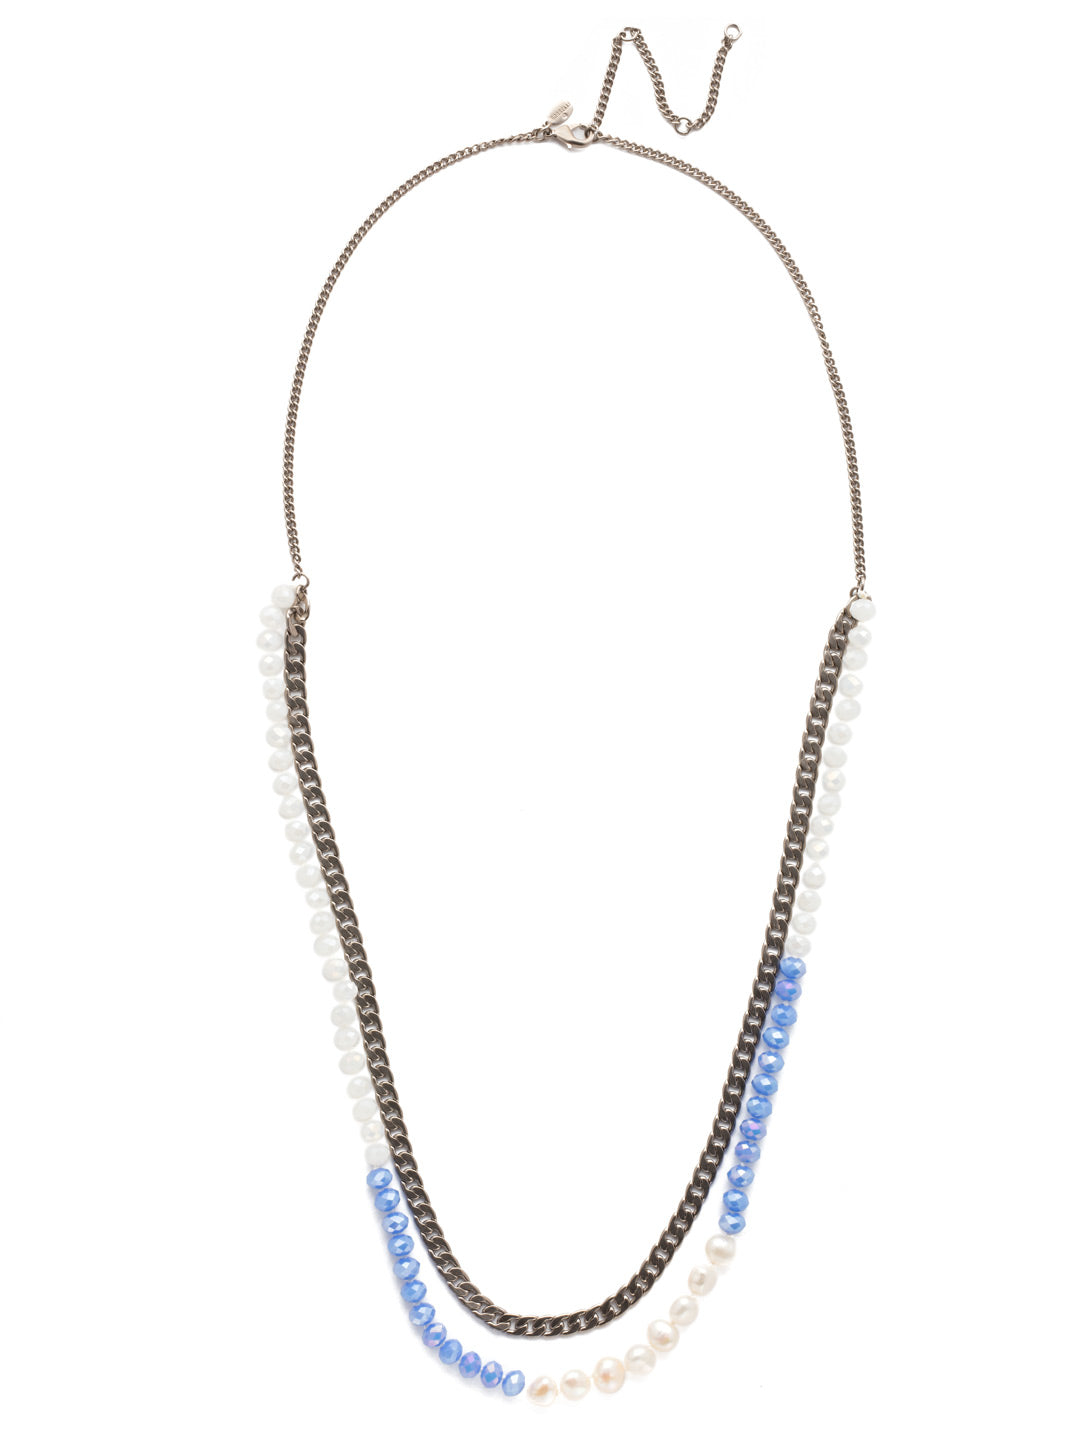 Brienne Long Strand Necklace - NEF42ASGLC - <p>A well-balanced combination of box chain and beads are found throughout this edgy stranded necklace that is sure to add light catching shine to any outfit. From Sorrelli's Glacier collection in our Antique Silver-tone finish.</p>